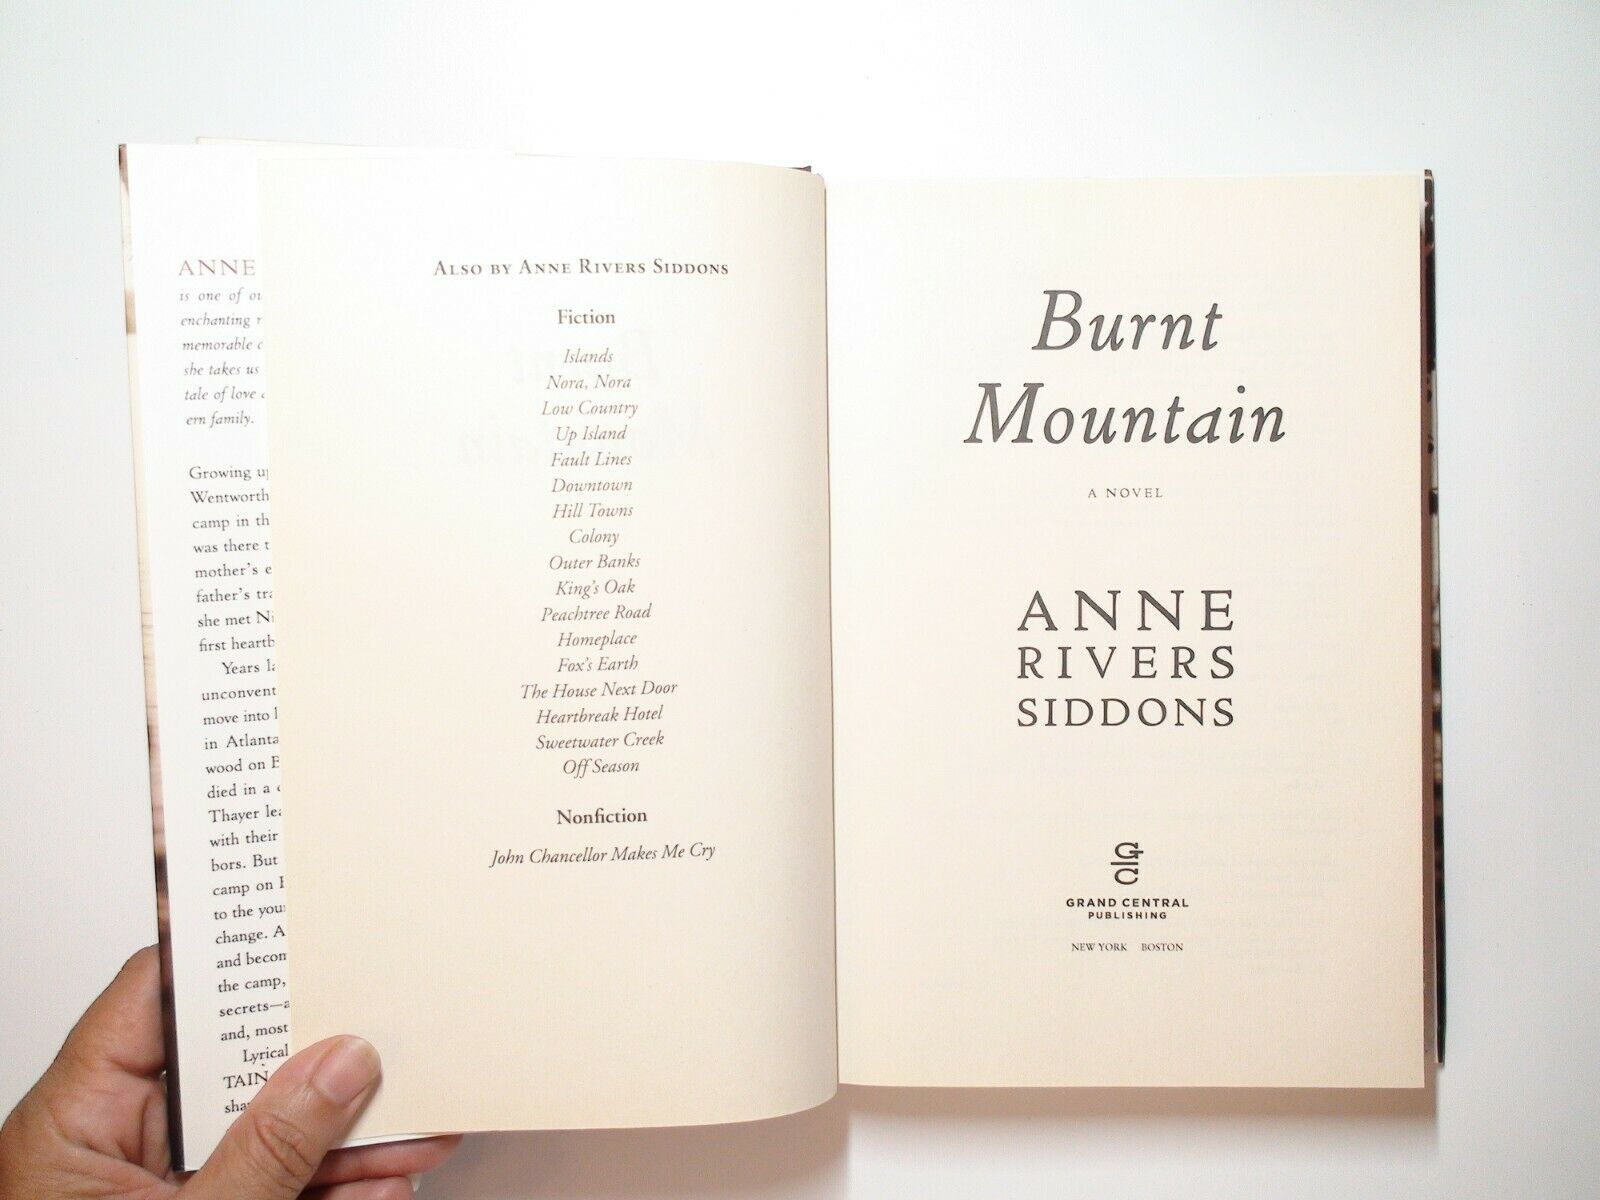 Burnt Mountain by Anne Rivers Siddons, 1st Ed, Hardcover w D/J, 2011